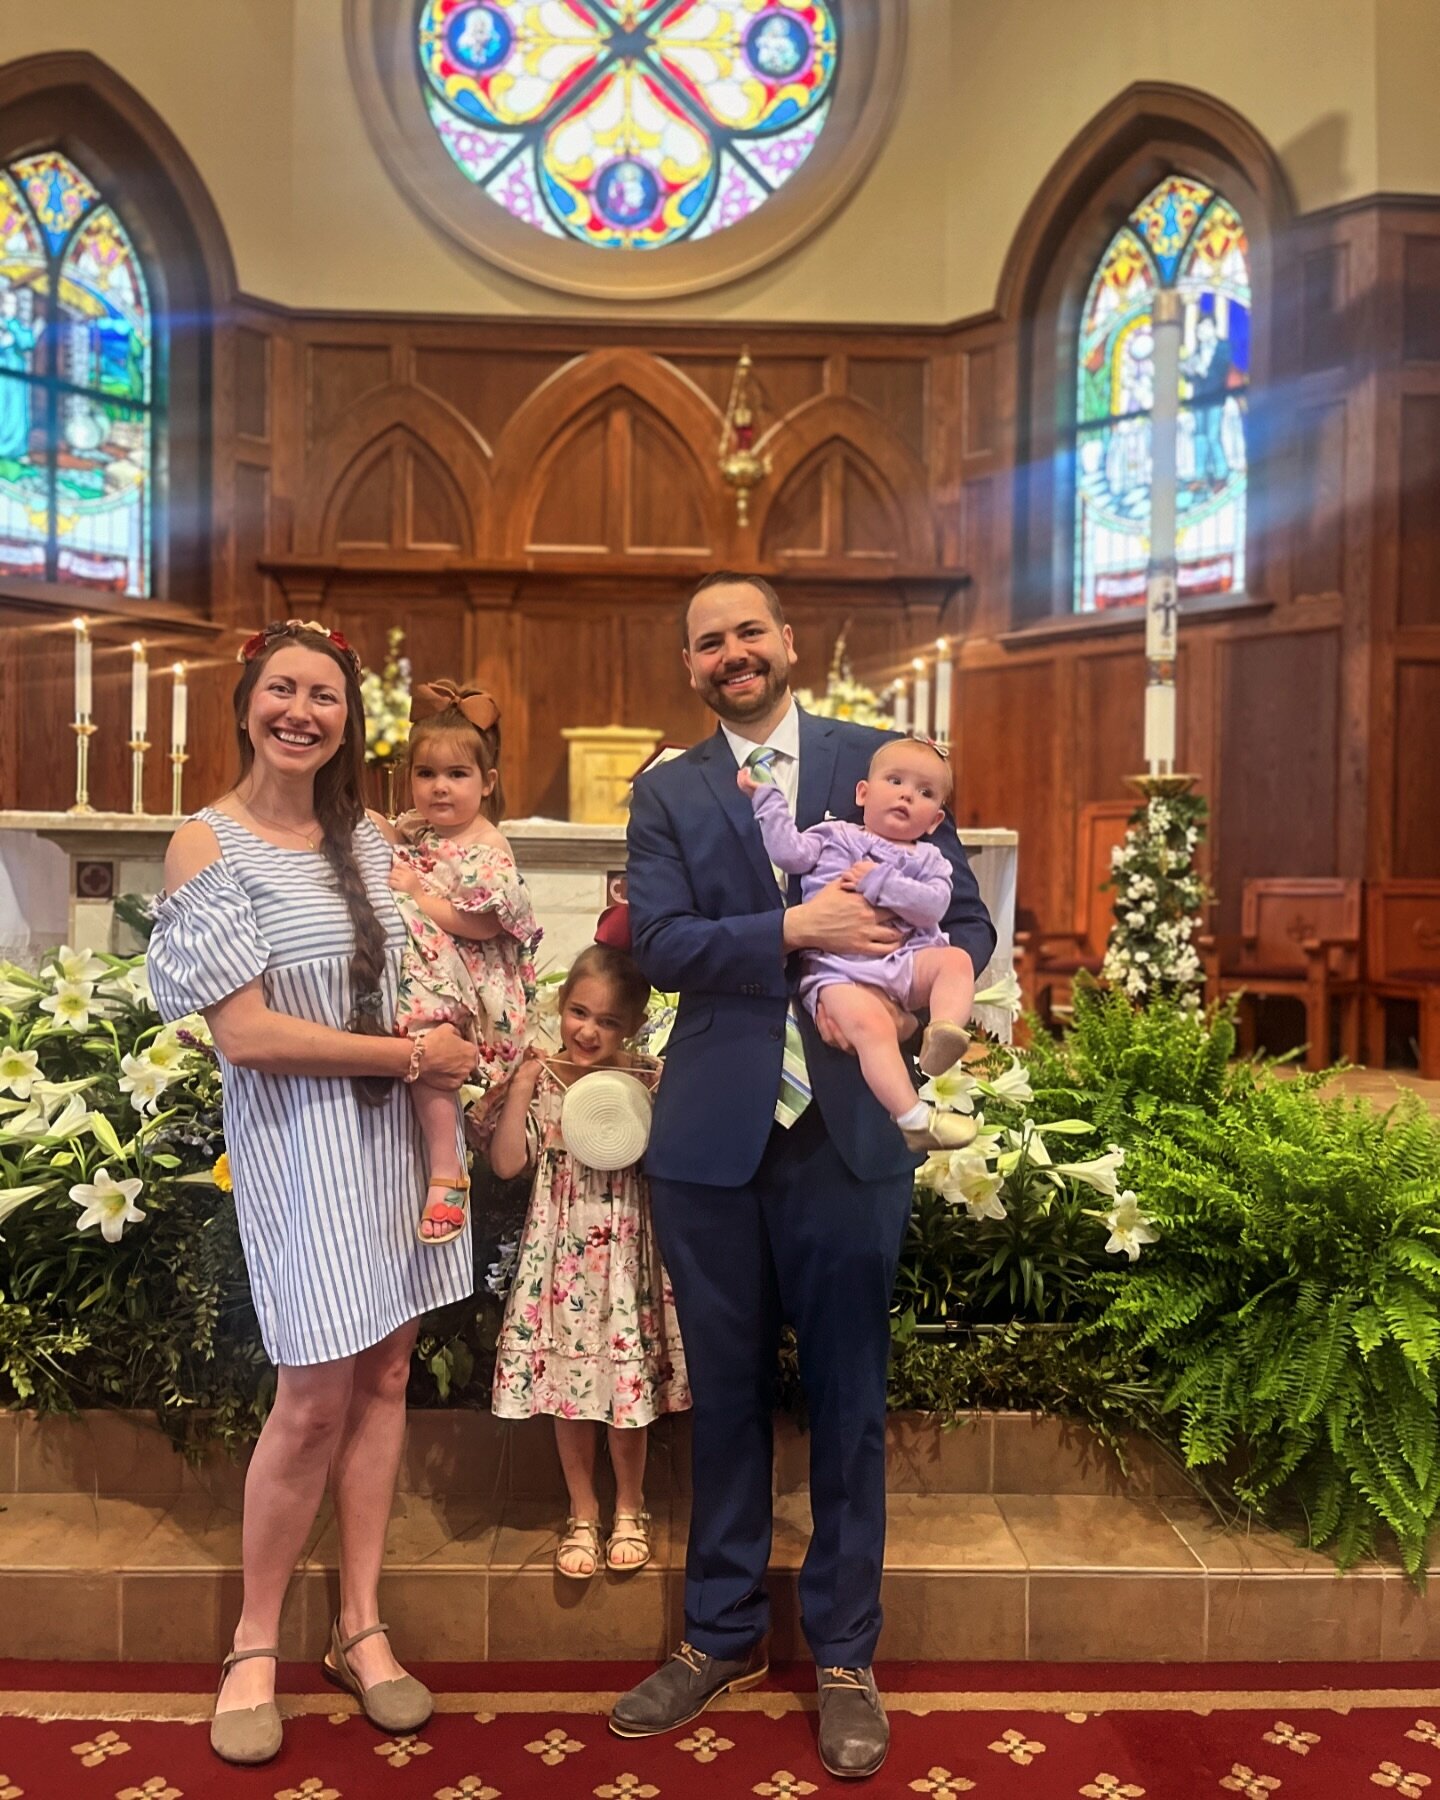 🌺 Happy Easter from our Family 🌺 

&ldquo;Therefore, since we also have such a great cloud of witnesses surrounding us, let&rsquo;s rid ourselves of every obstacle and the sin which so easily entangles us, and let&rsquo;s run with endurance the rac